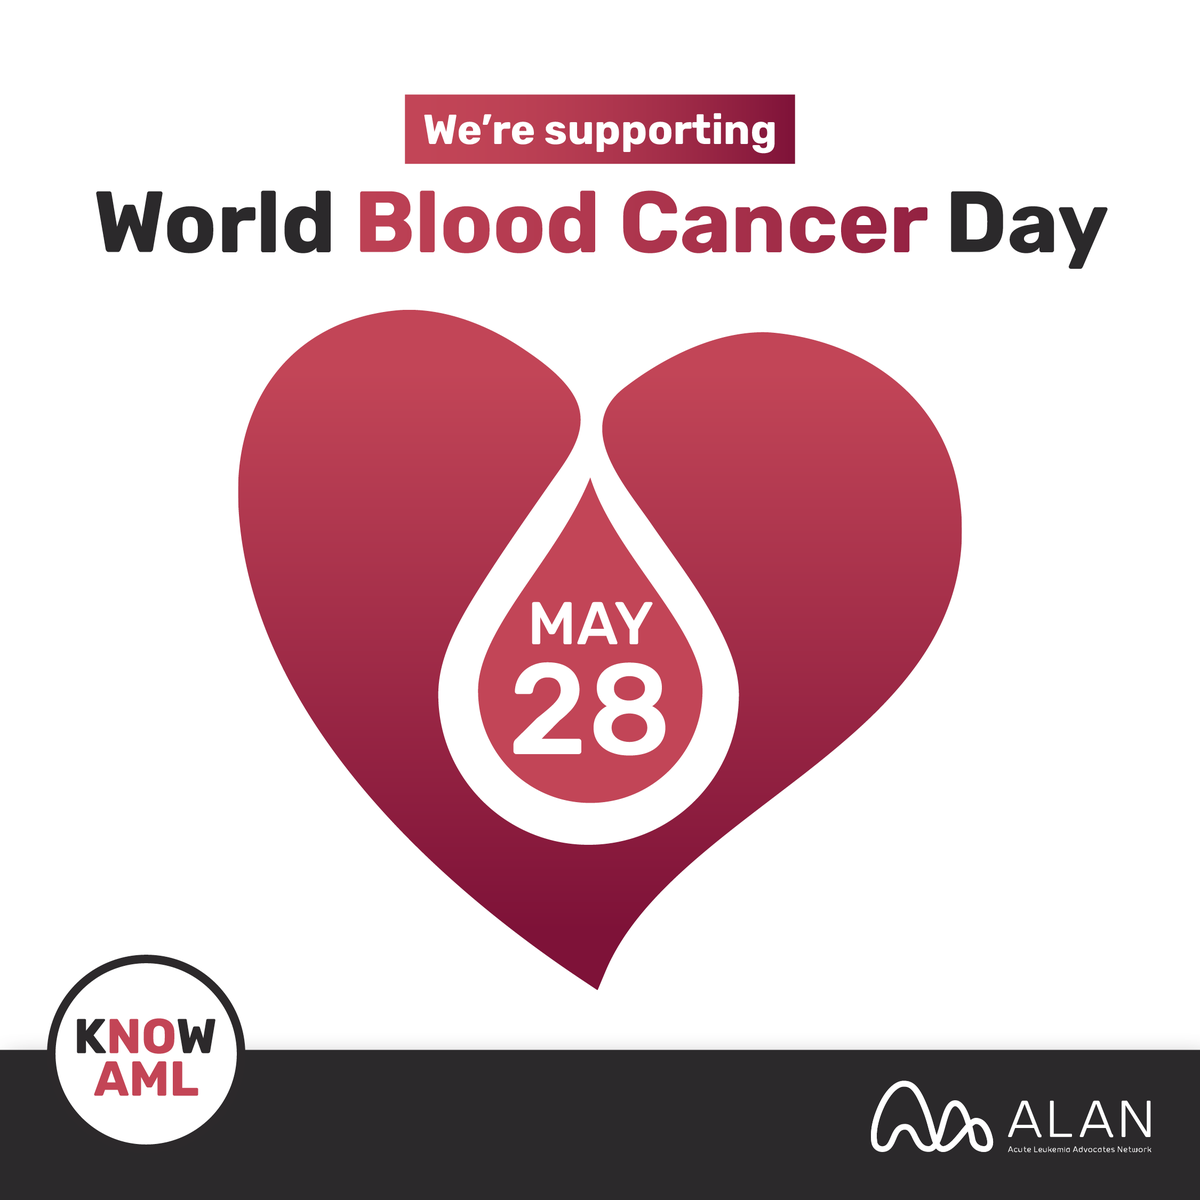 #KnowAML are supporting #WorldBloodCancerDay! There are 3 main types of #BloodCancer: leukemia, lymphoma, and myeloma. They can either be fast growing (acute) or slow growing (chronic). #AcuteMyeloidLeukemia can develop quickly and may need urgent treatment. To learn more,